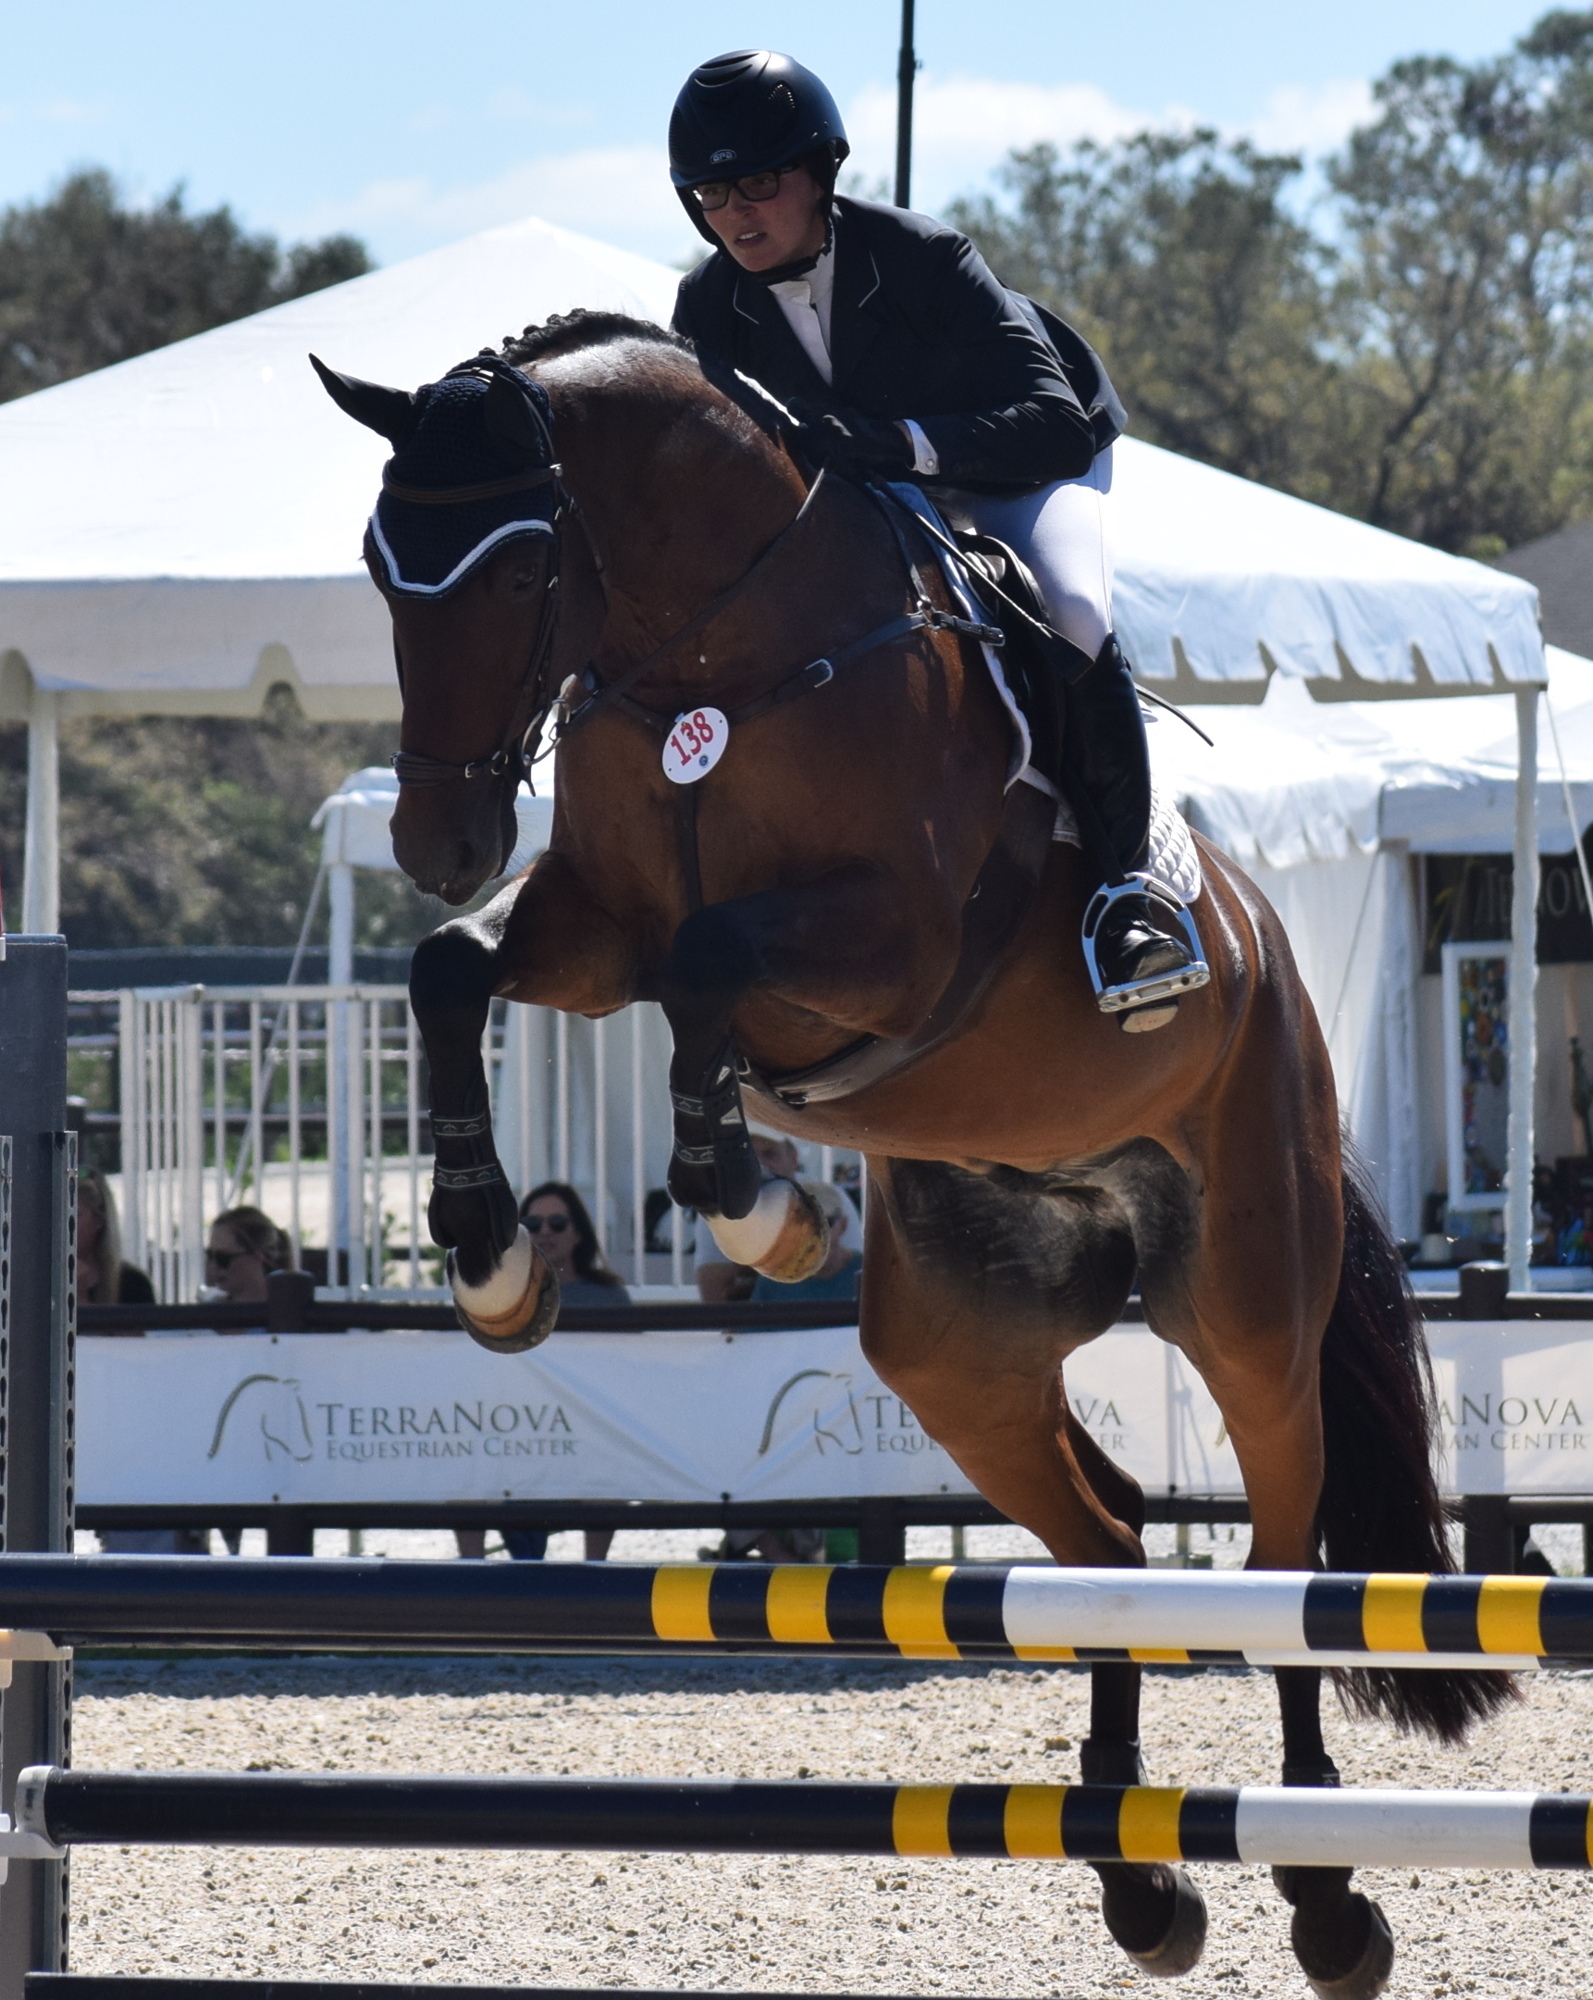 Riders compete at a recent event at TerraNova in east Manatee County. (Photo by Jay Heater)